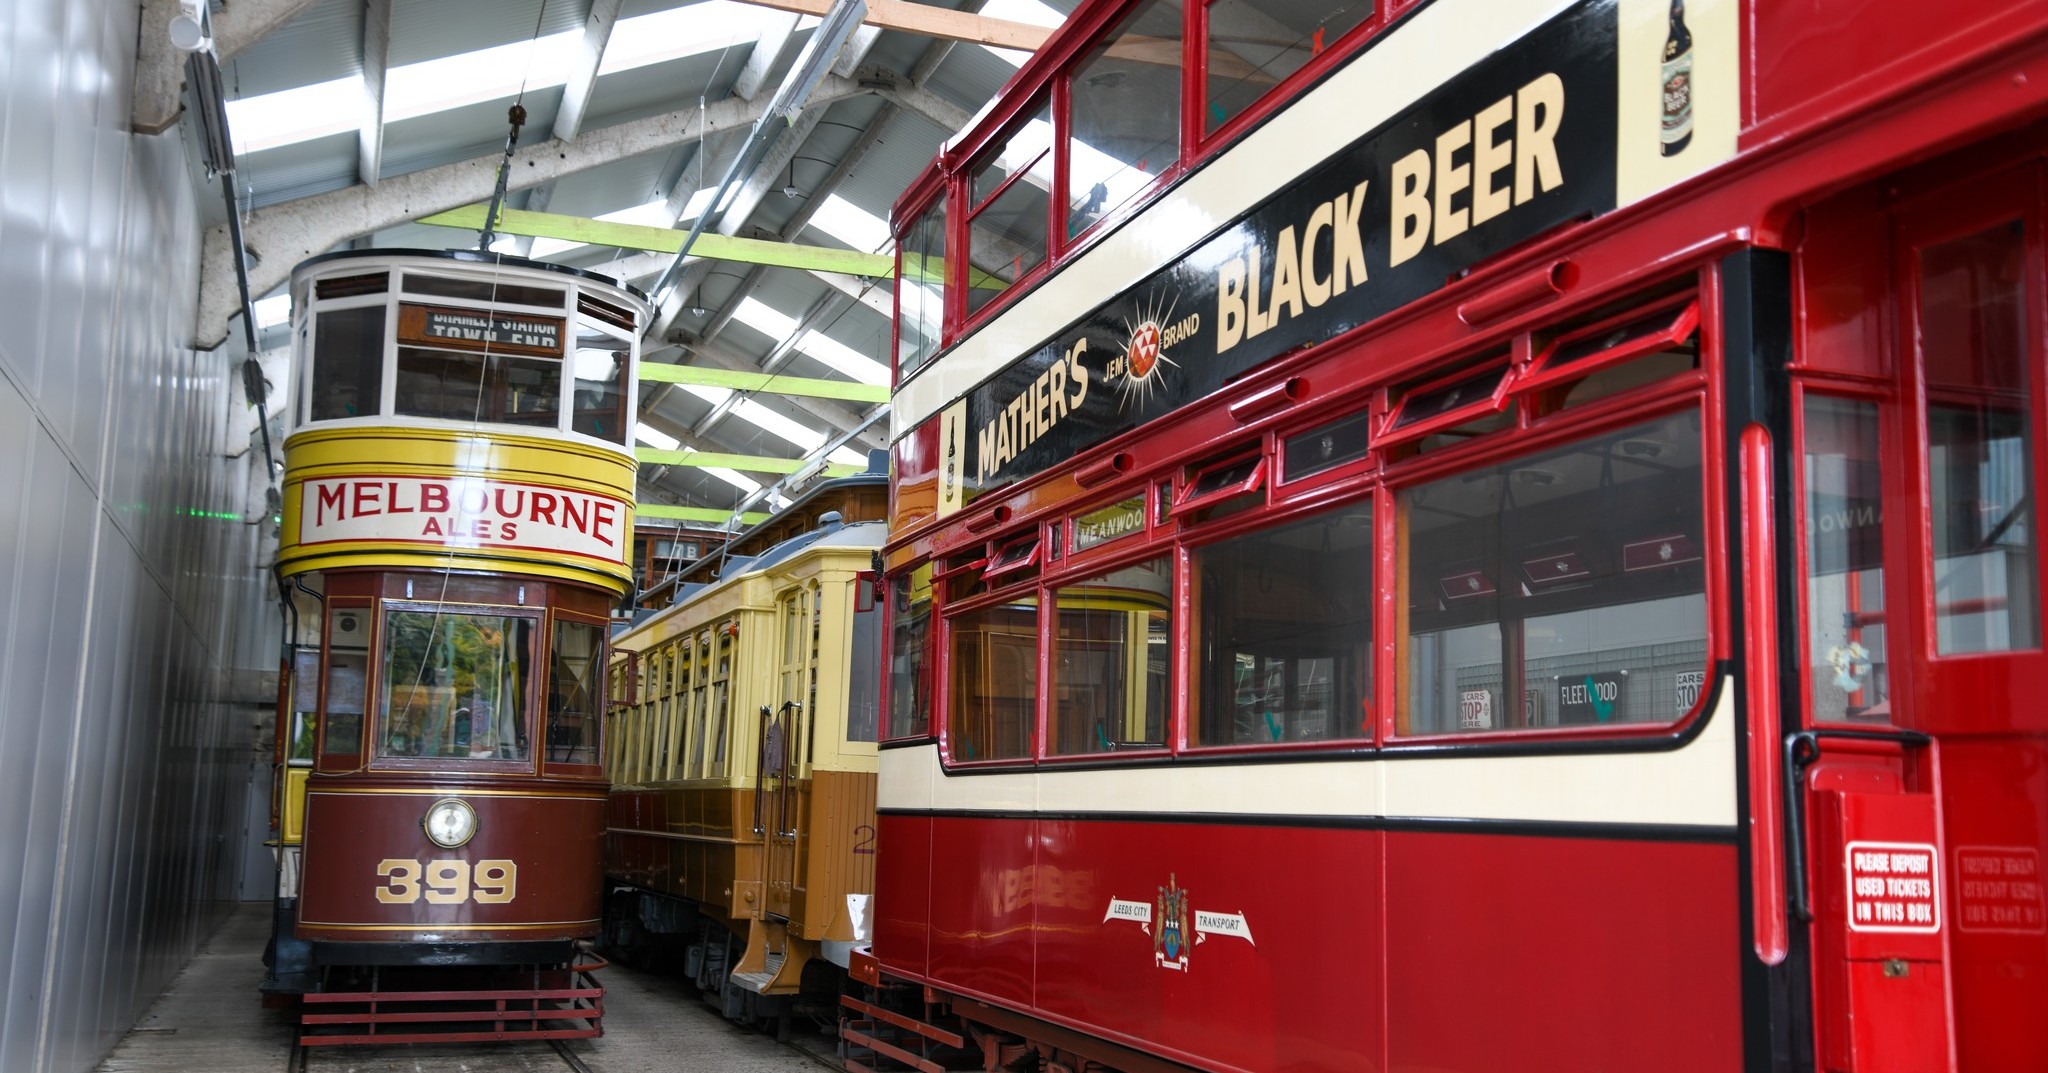 Electrical supply fault delays tram operation at heritage site